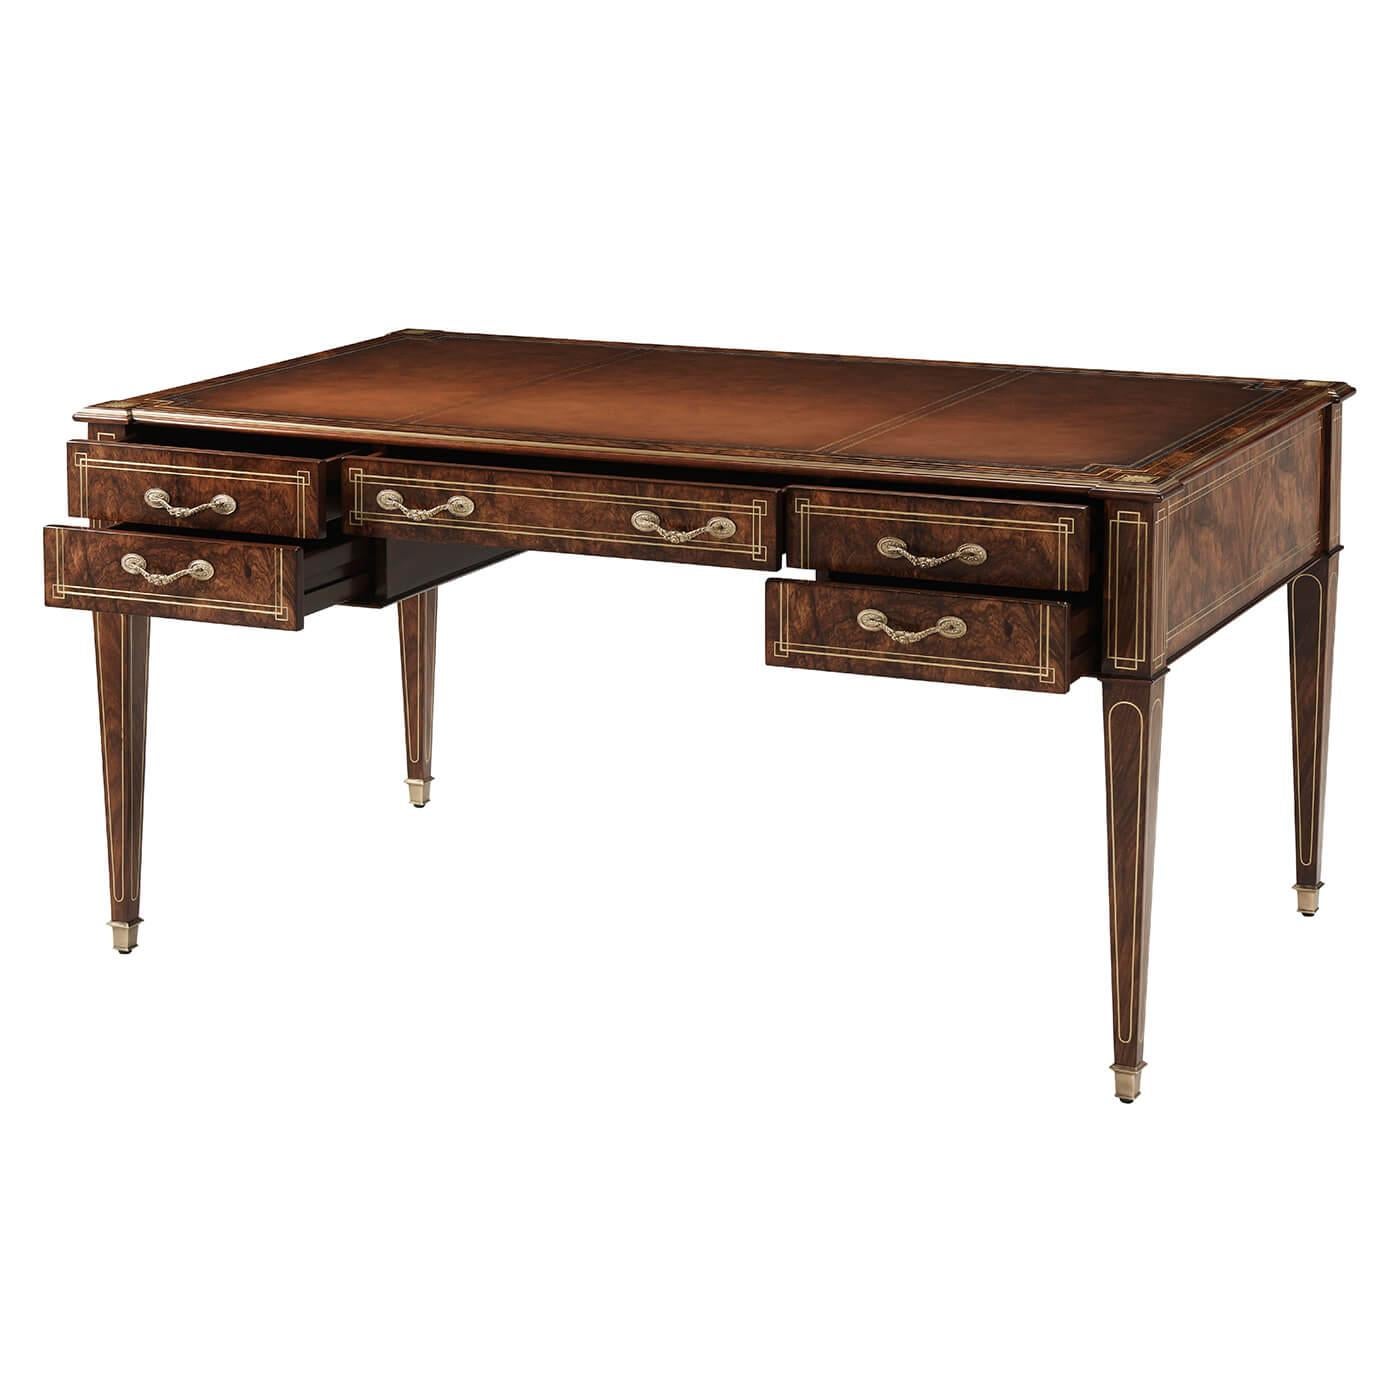 A French neoclassic style Bureau Plat with a gilt-tooled inset leather top writing surface, with exotic Zebrali veneers, with five drawers, fine brass inlays, raised on brass inlaid square tapered legs and square brass sabots.

Dimensions: 60